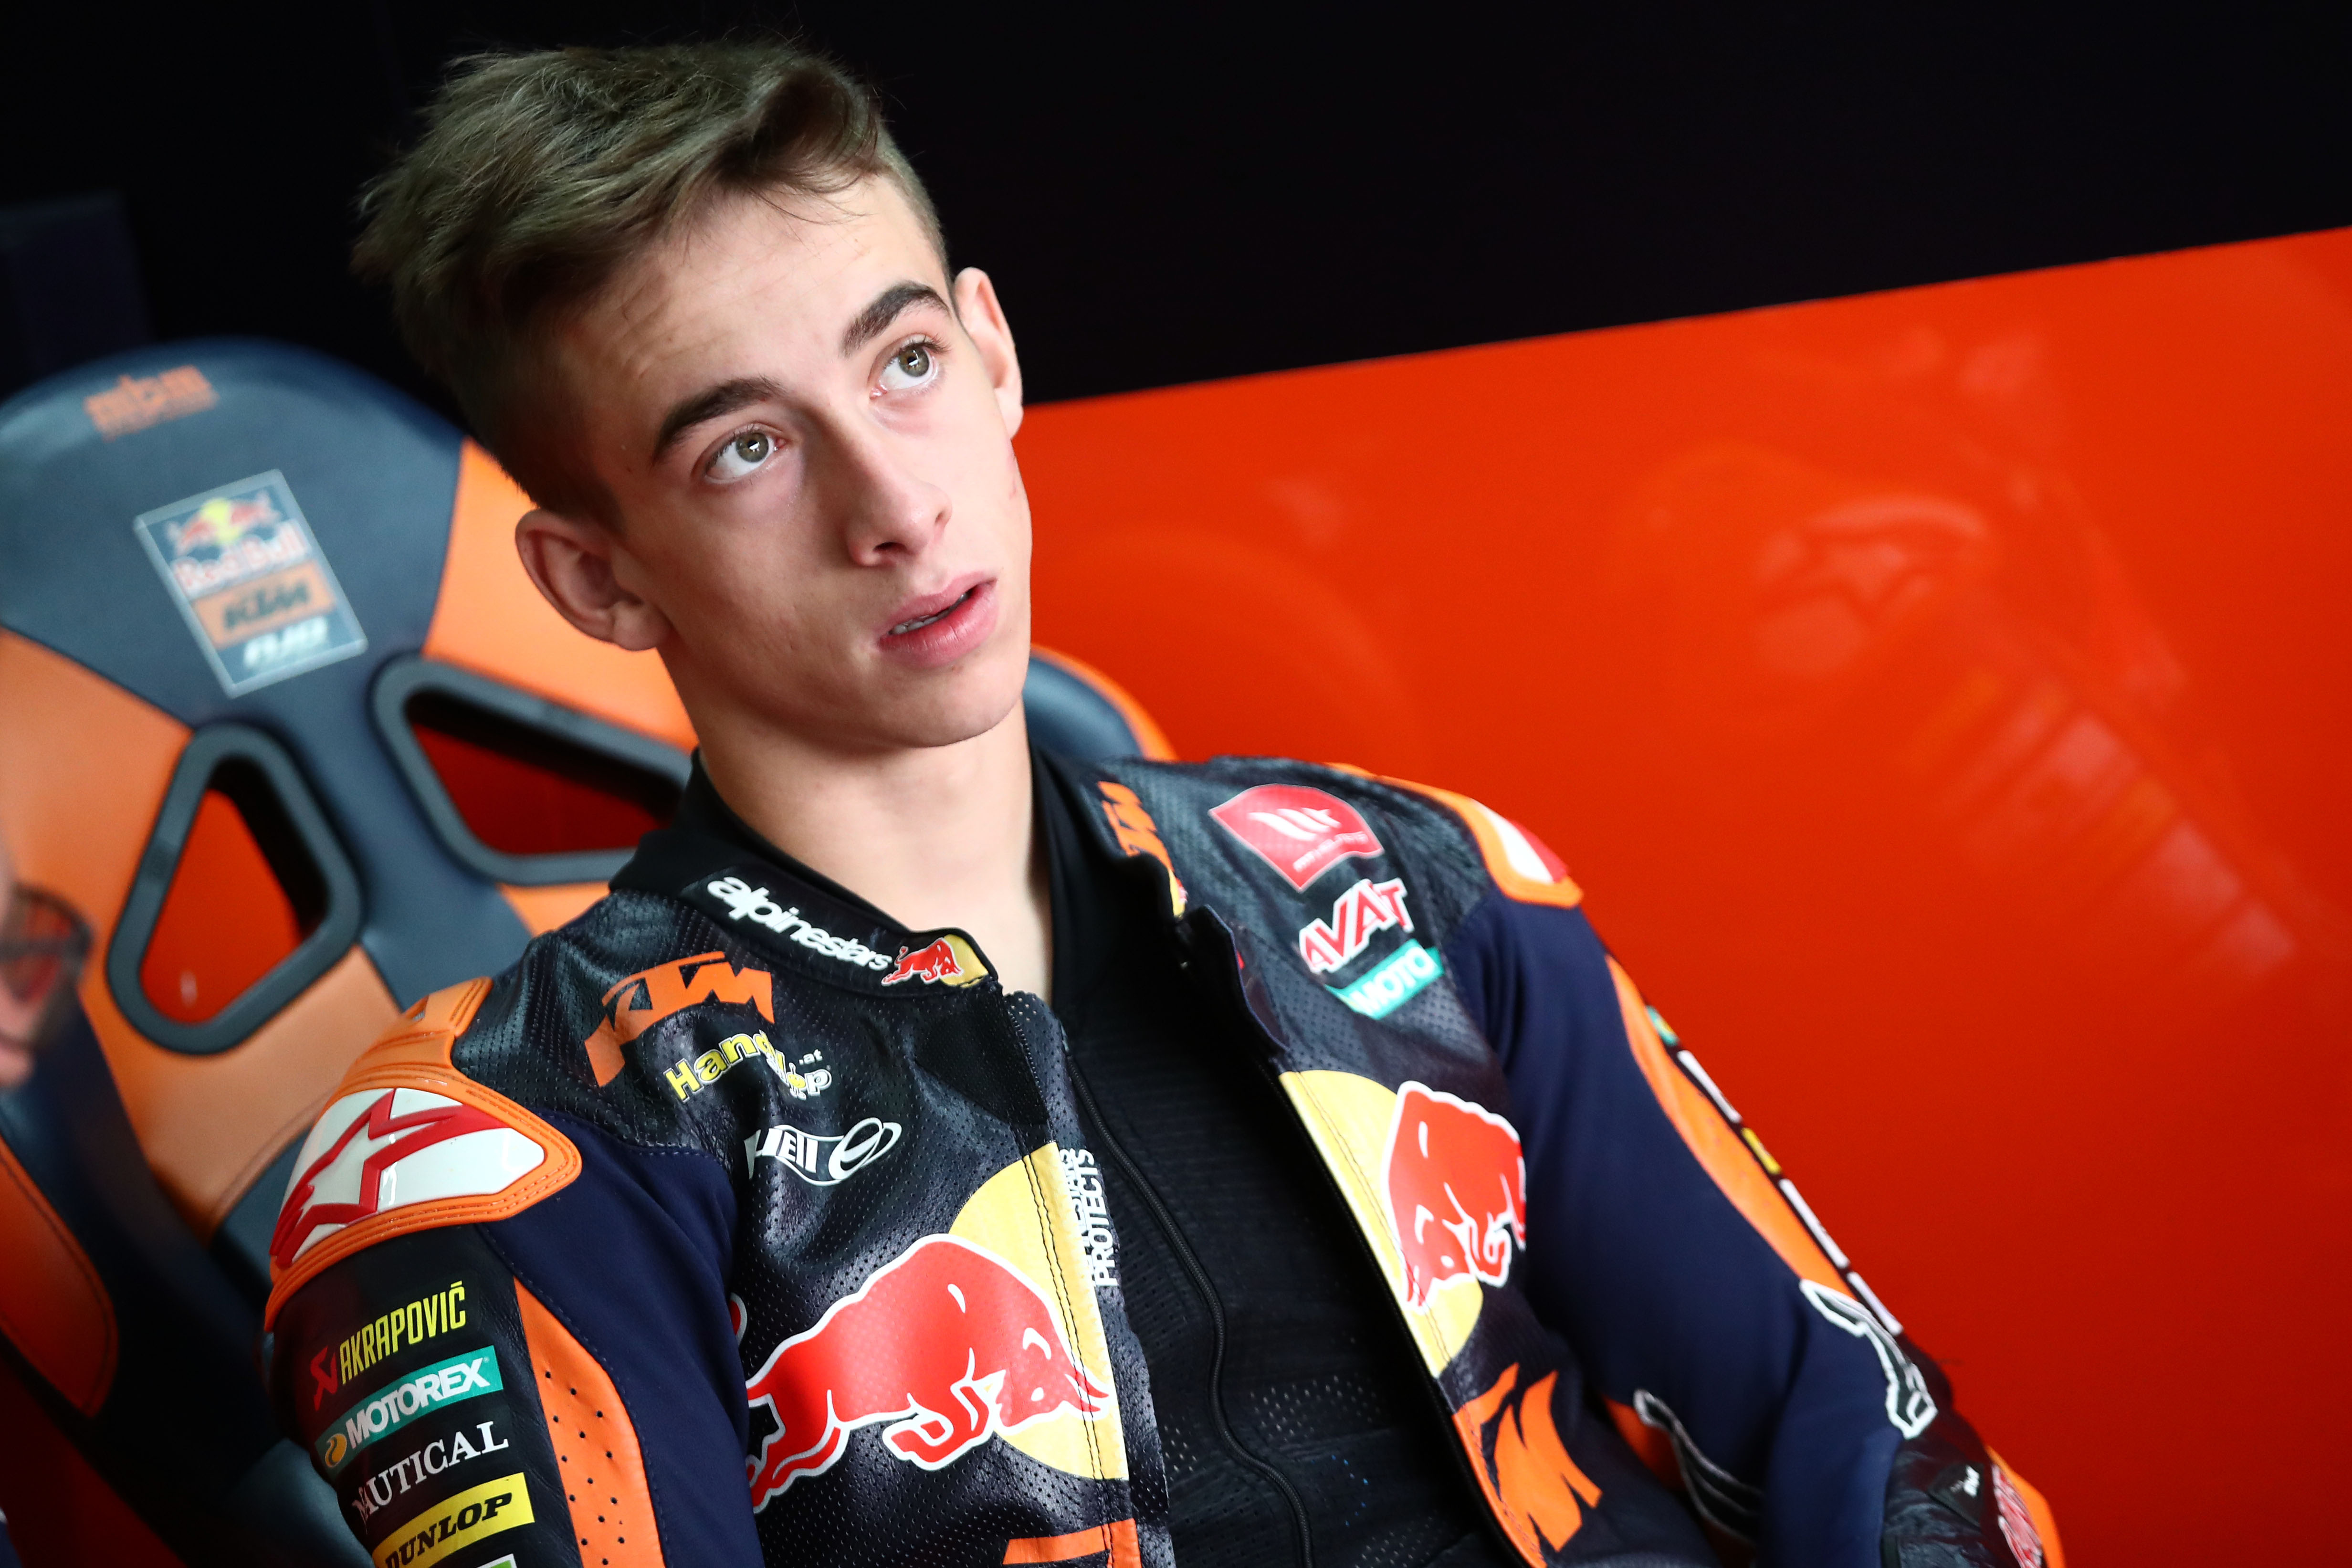 KTM has yet another MotoGP mega-prospect - but can it make room? - The Race